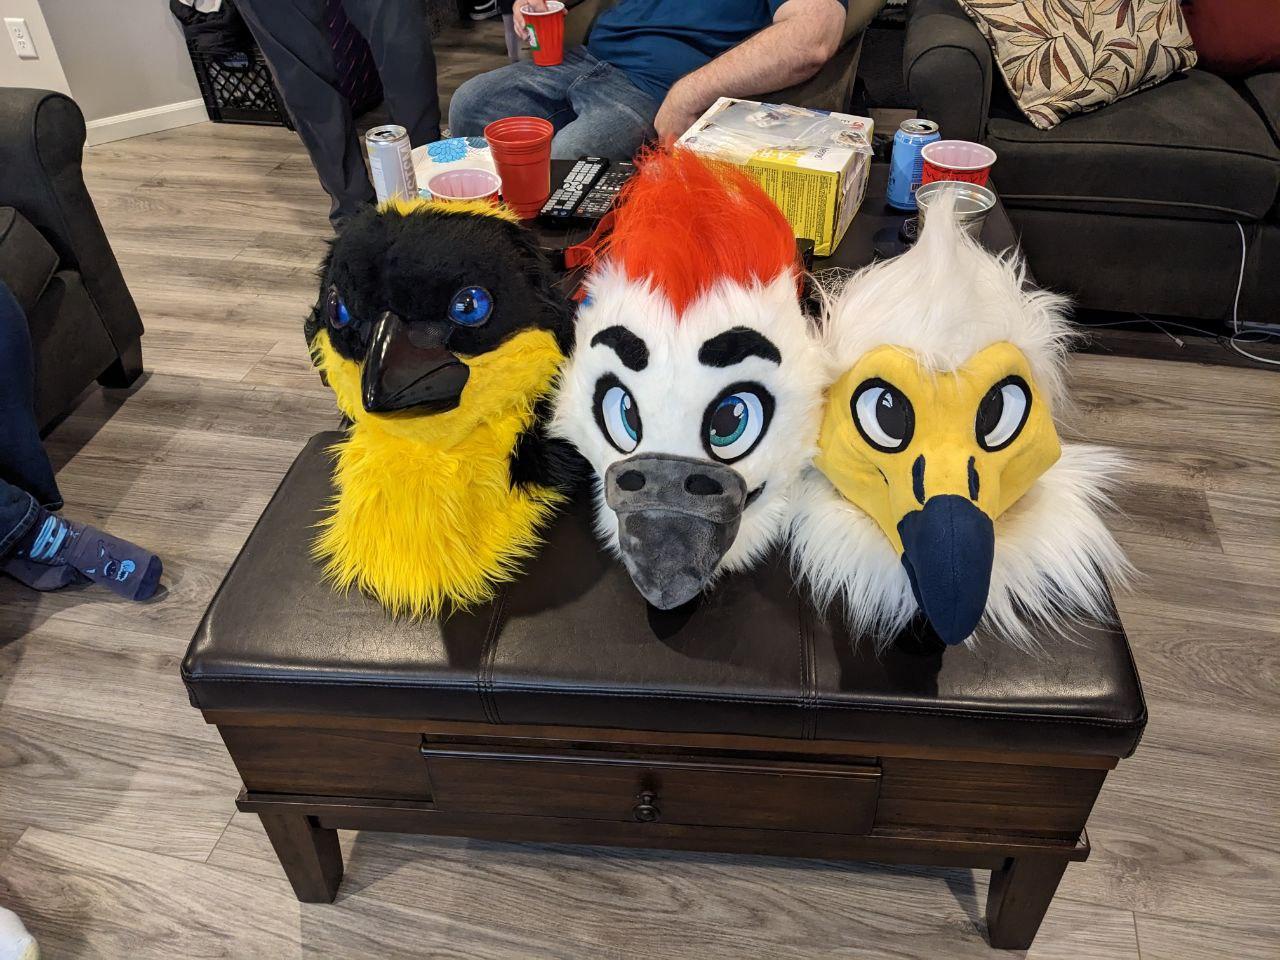 fur suit heads, each one a different kind of bird